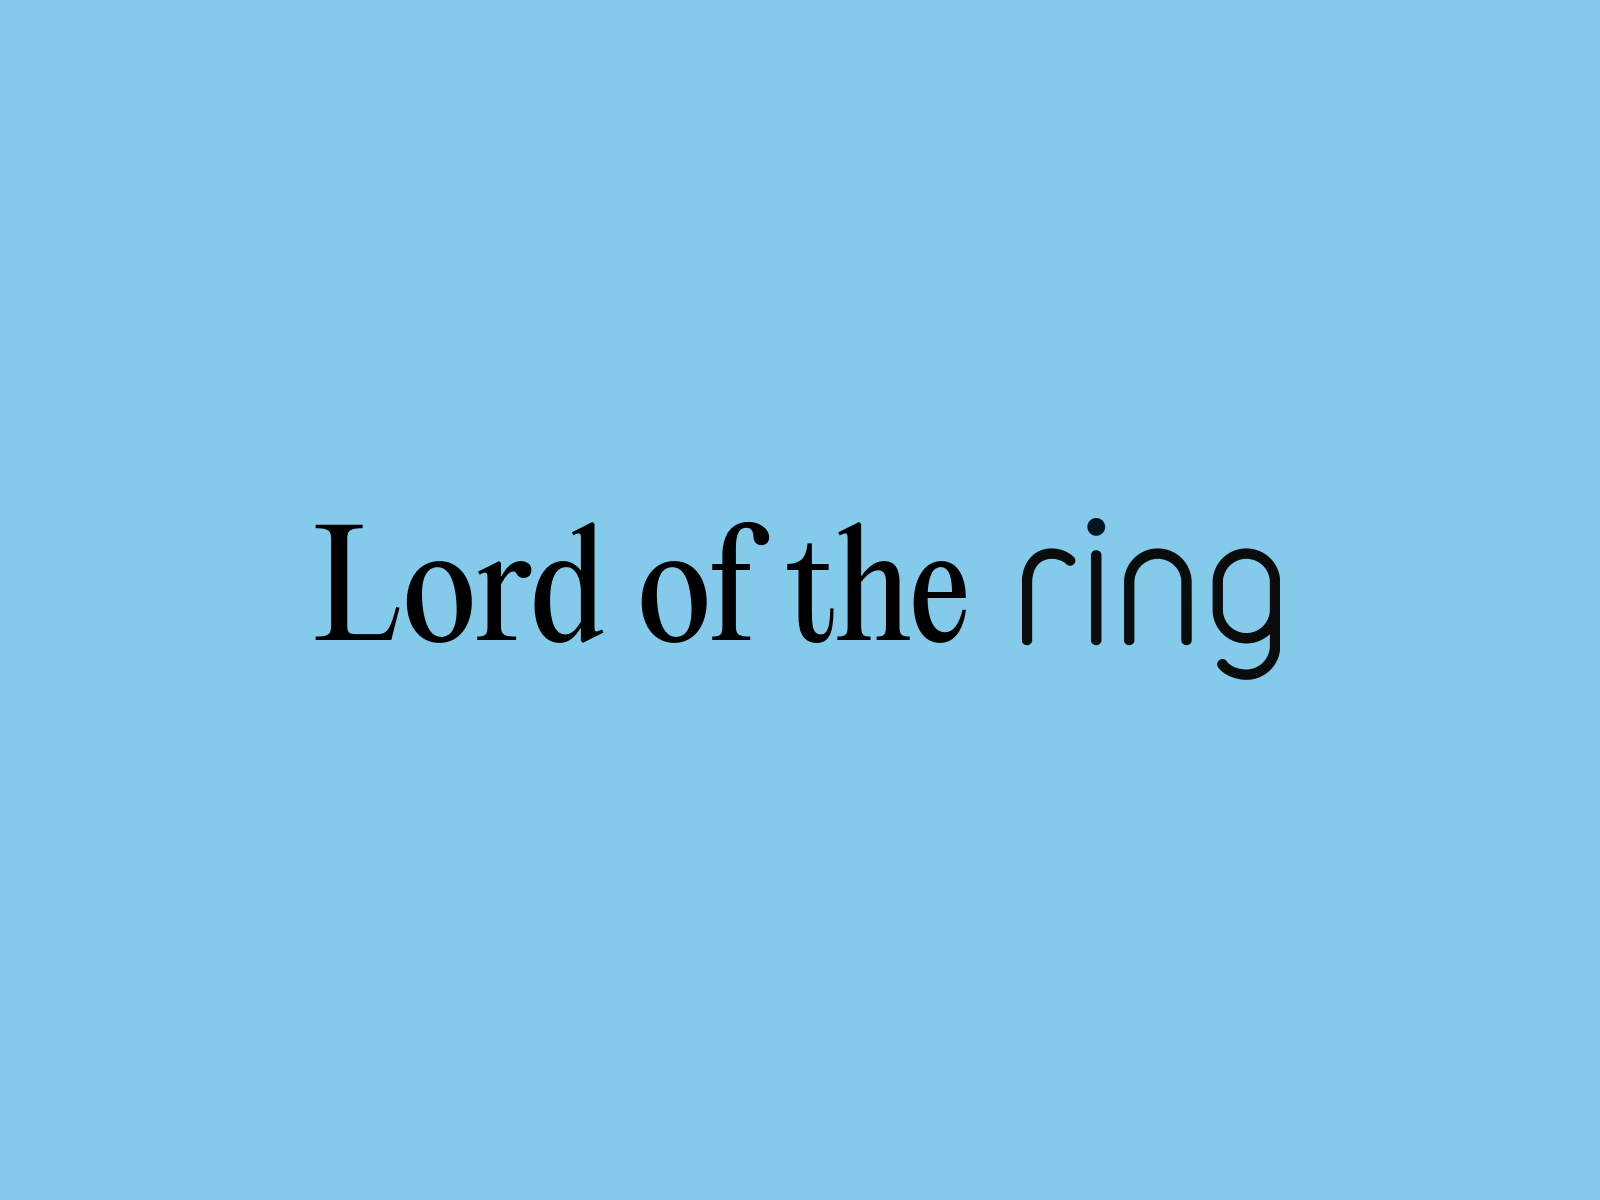 Lord the ring